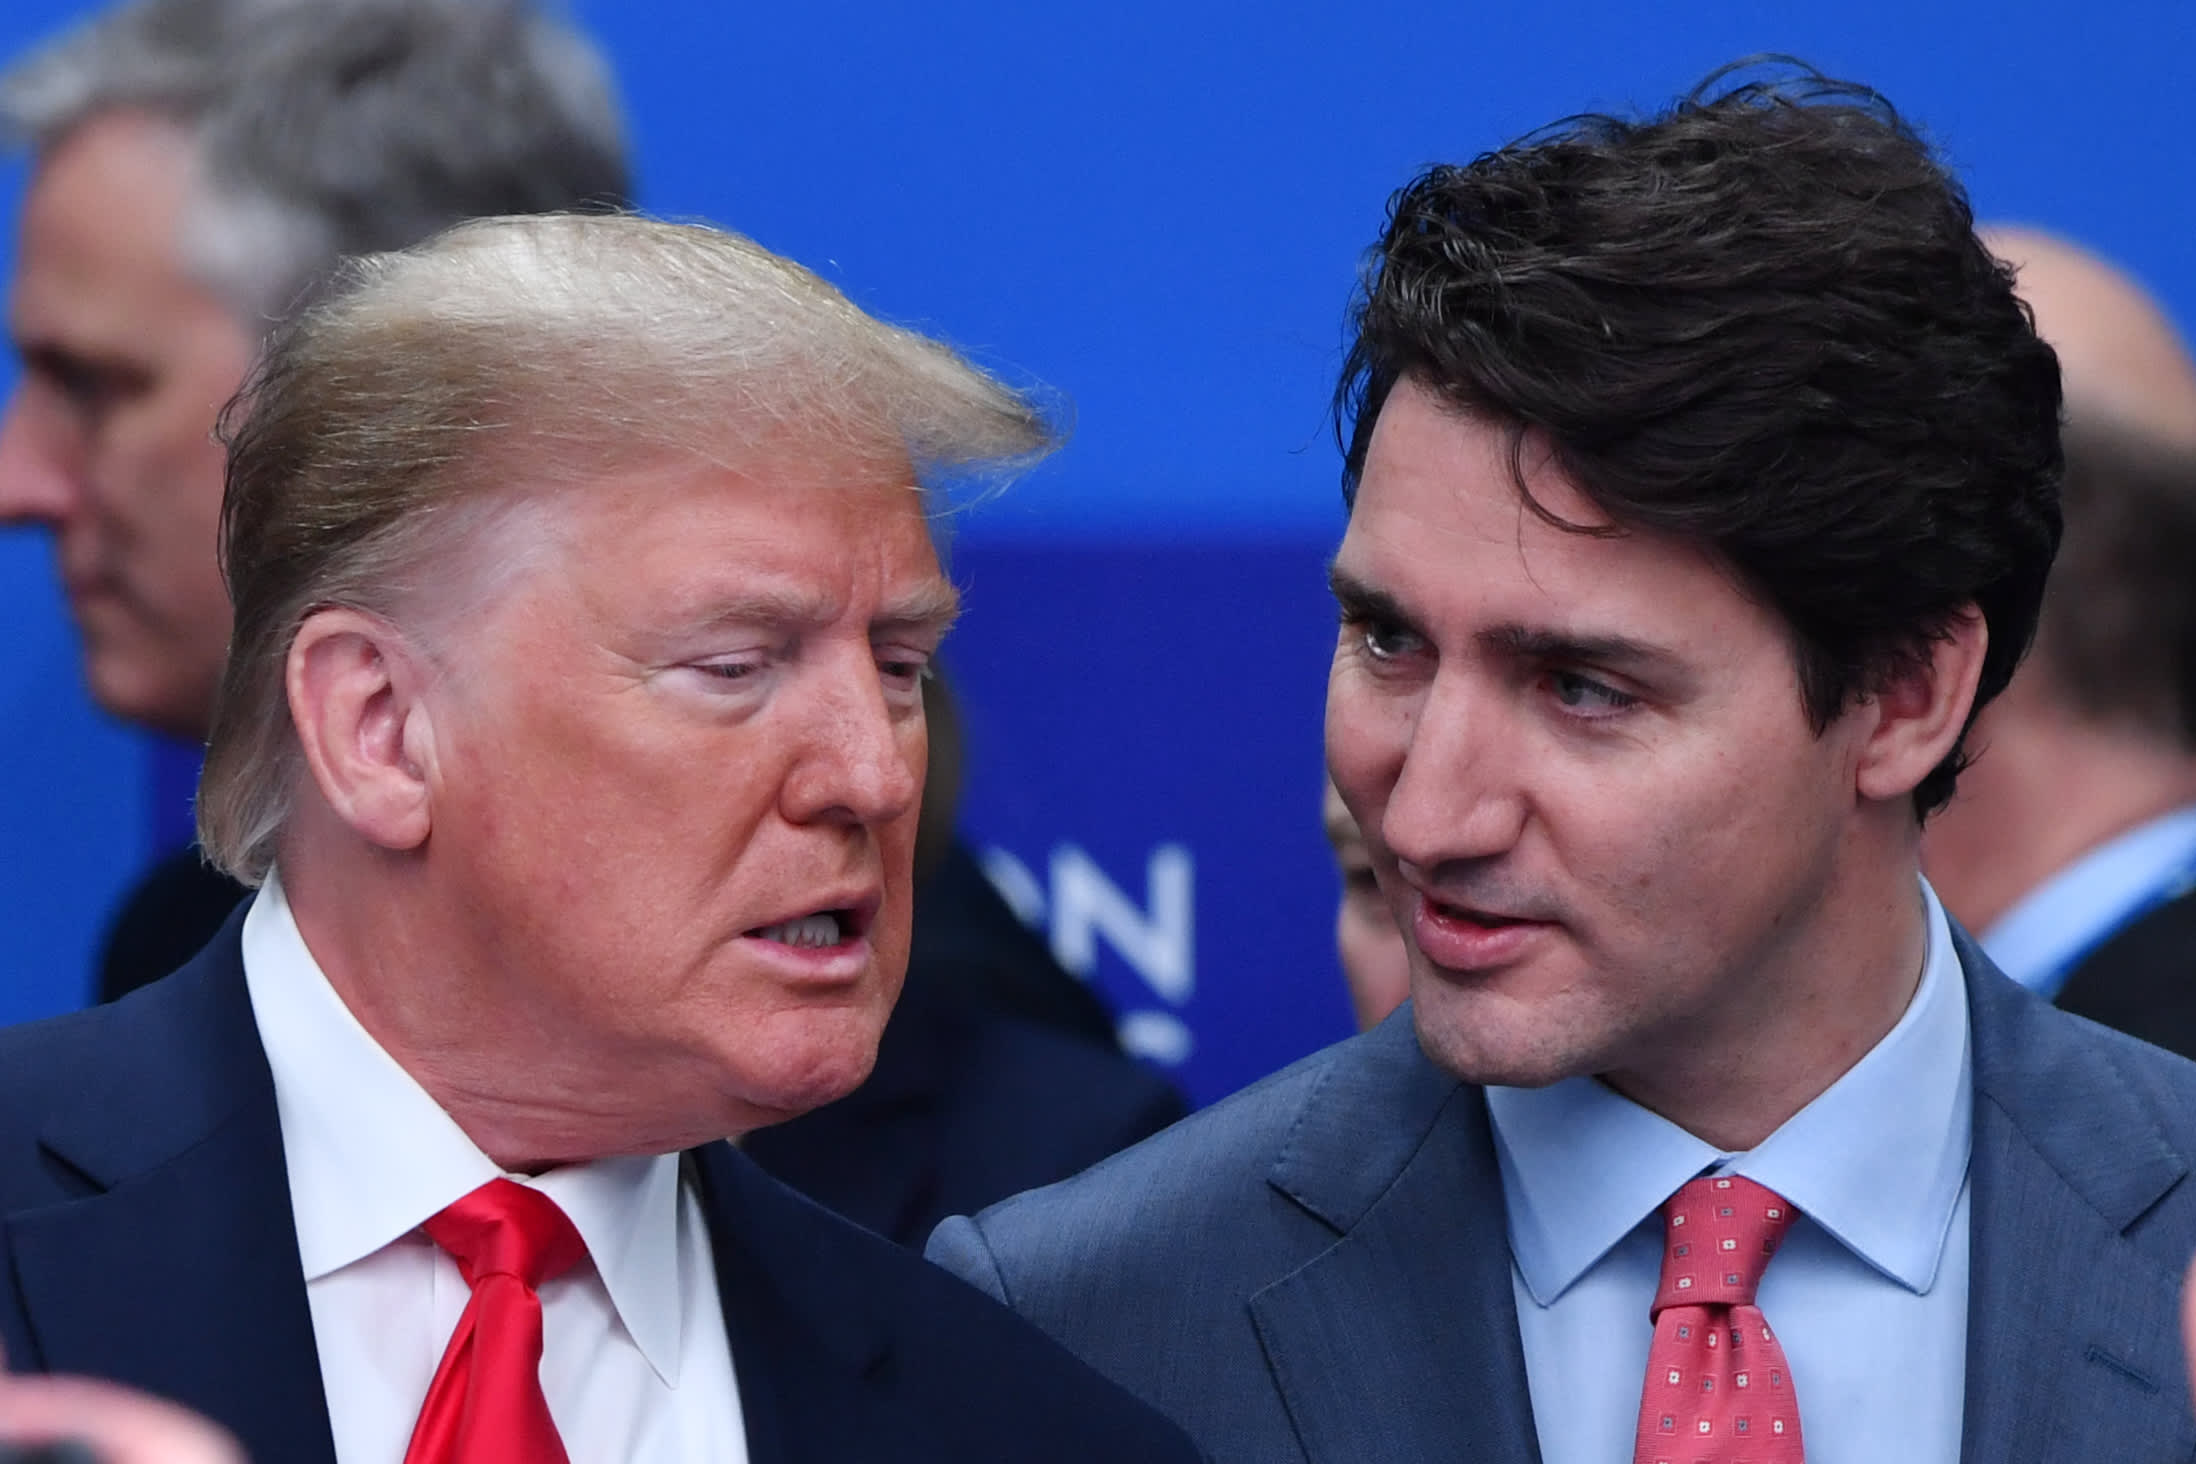 President Trump on Justin Trudeau: “He’s two-faced.”